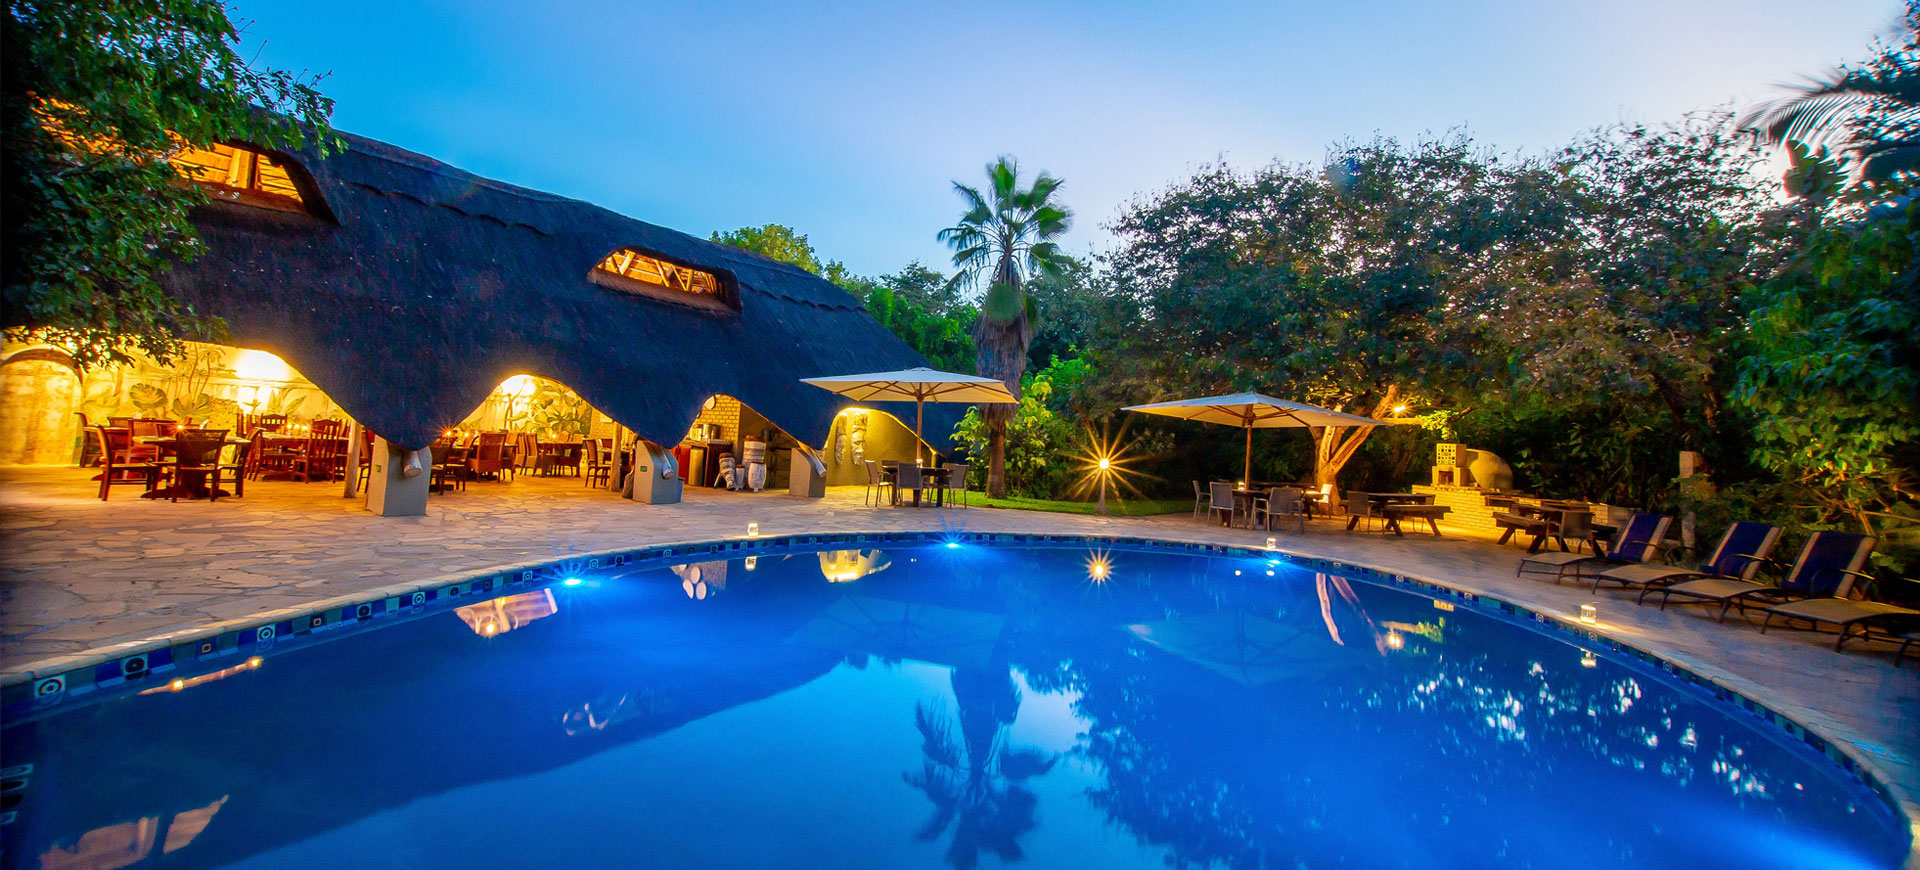 Bayete Guest Lodge